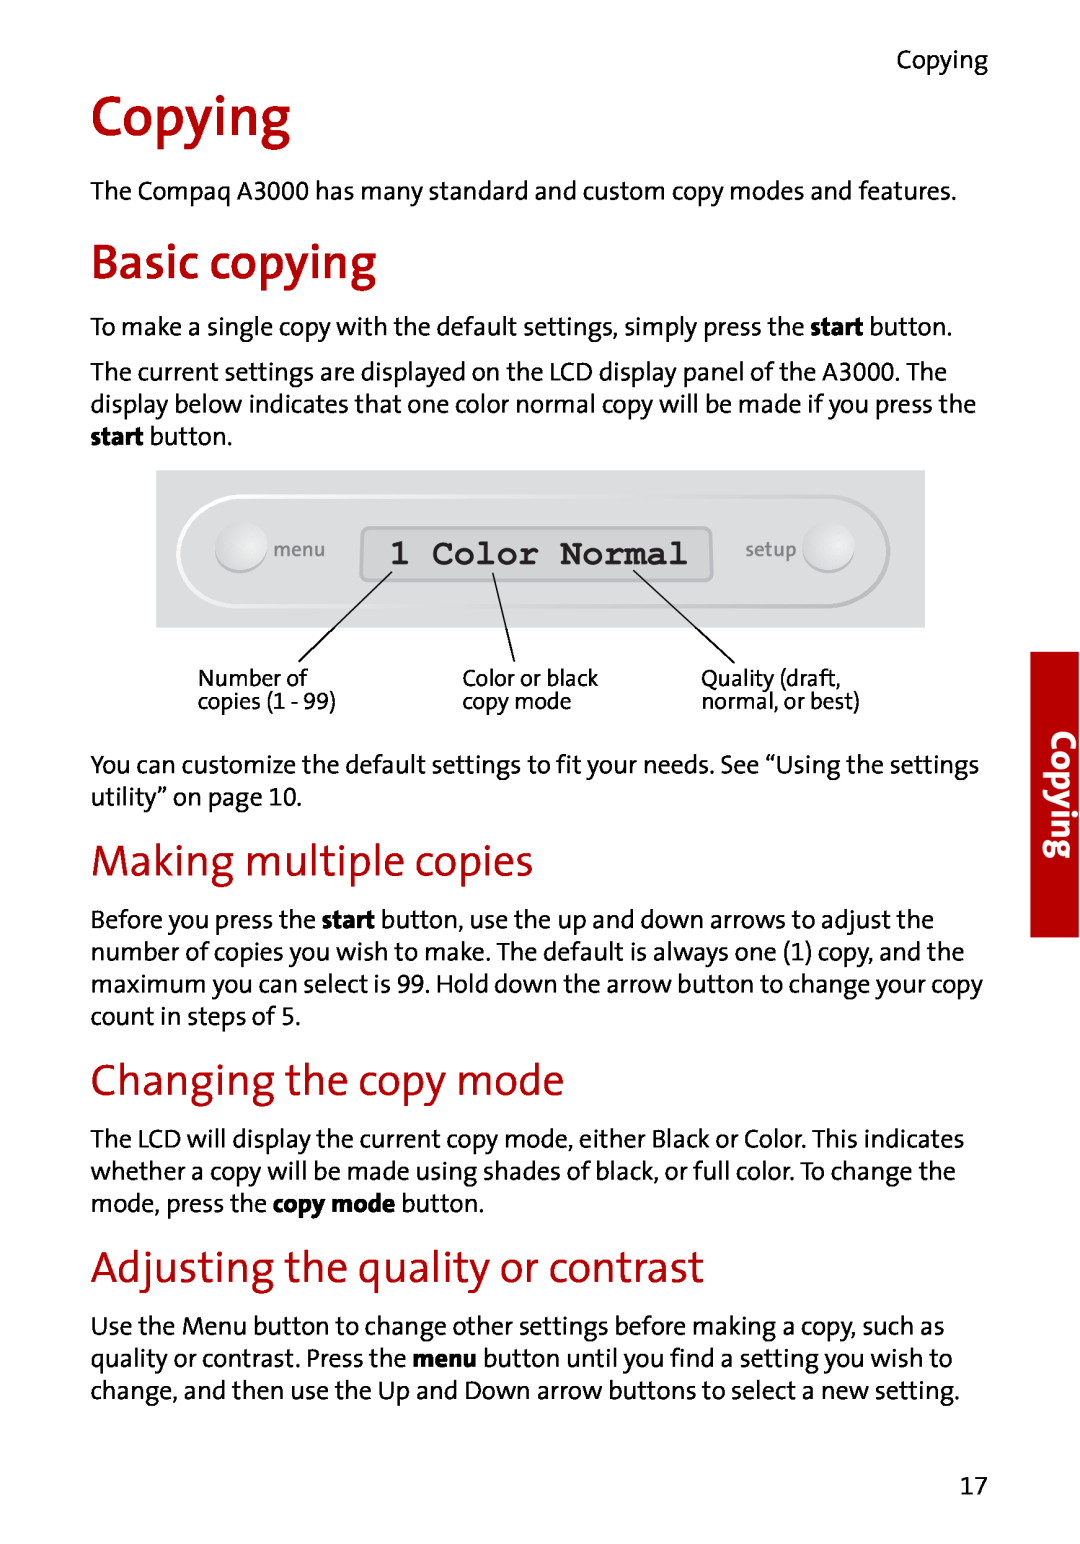 Compaq A3000 Copying, Basic copying, Making multiple copies, Changing the copy mode, Adjusting the quality or contrast 